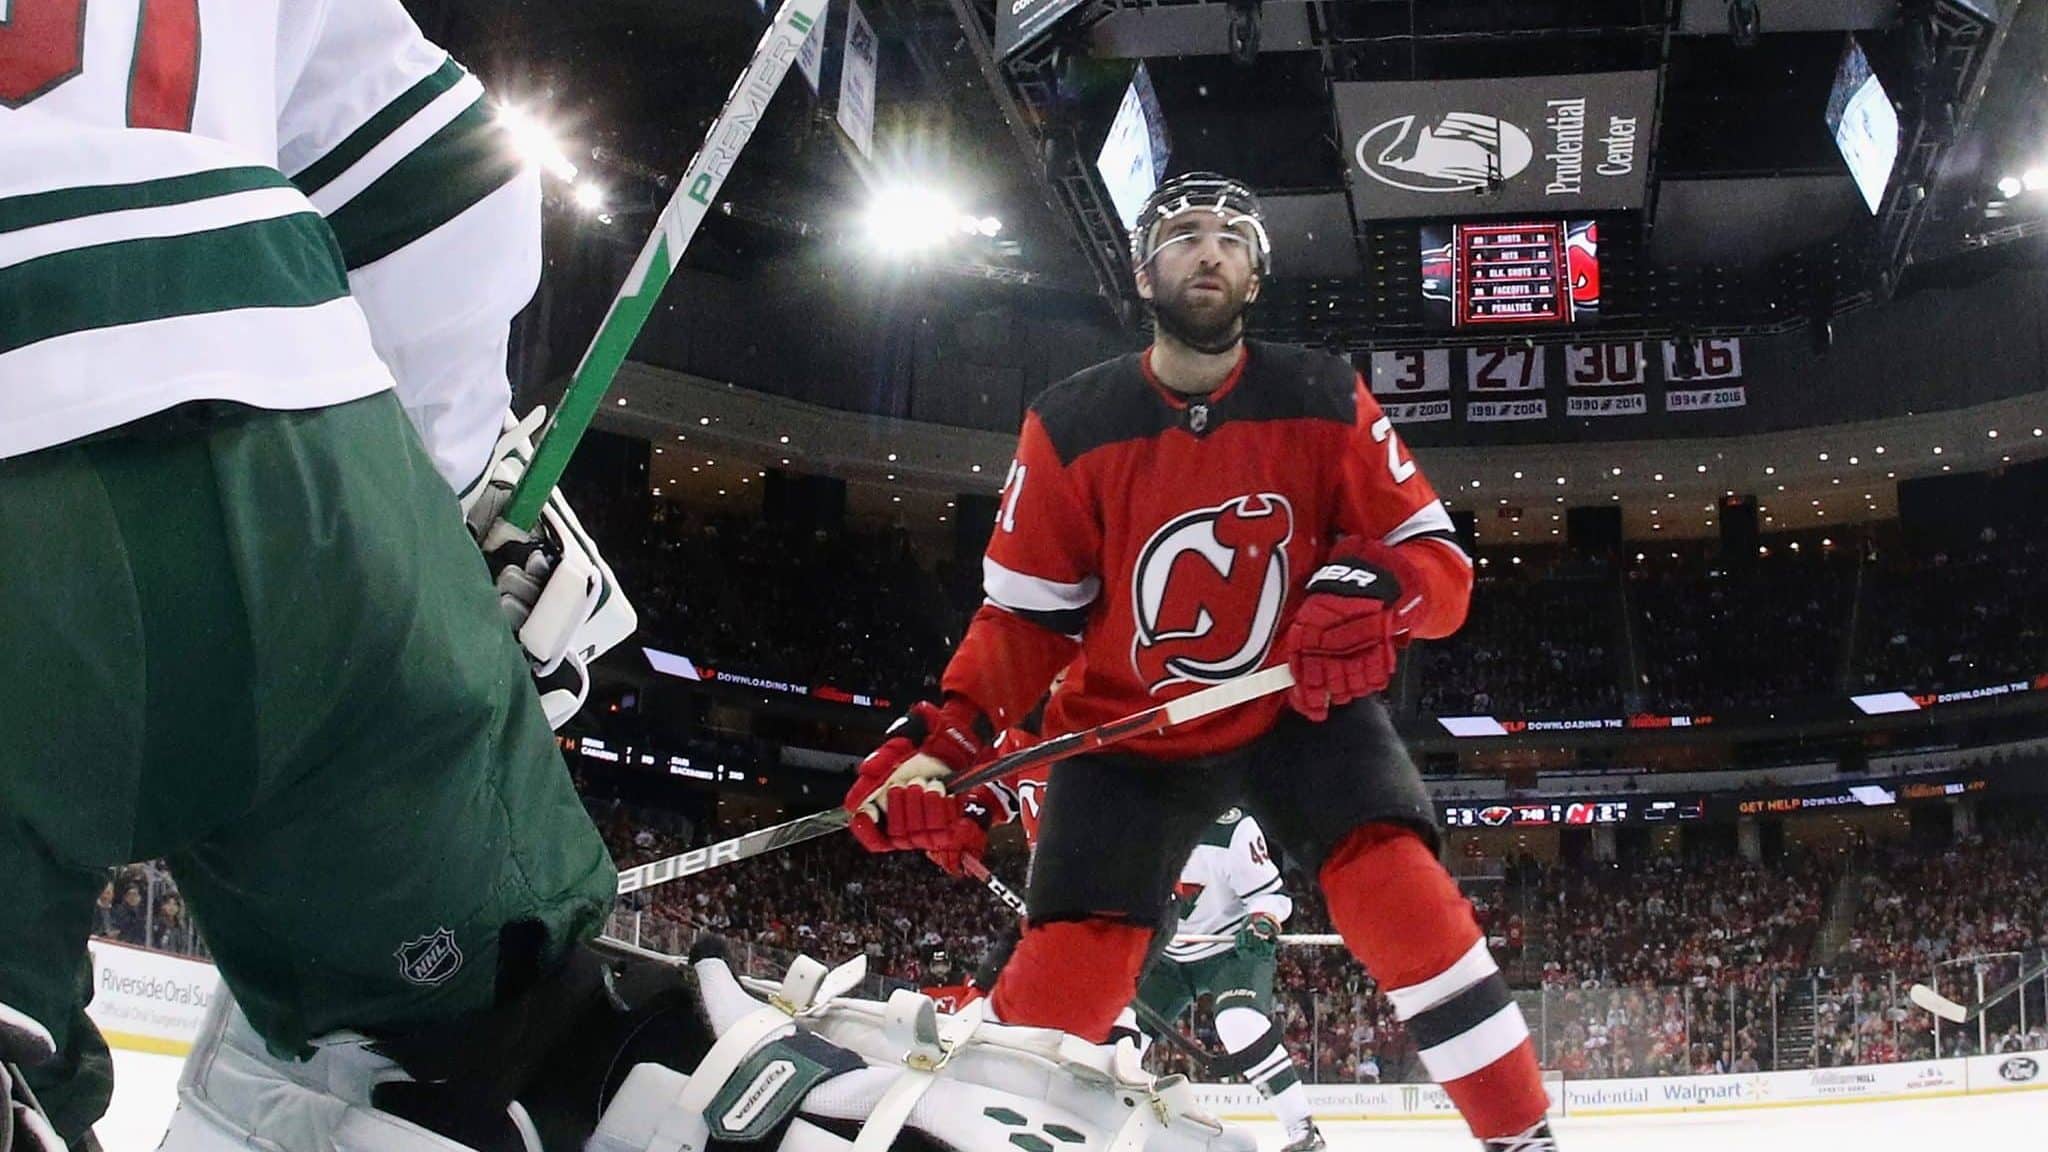 NEWARK, NEW JERSEY - NOVEMBER 26: Kyle Palmieri #21 of the New Jersey Devils skates against the Minnesota Wild at the Prudential Center on November 26, 2019 in Newark, New Jersey.